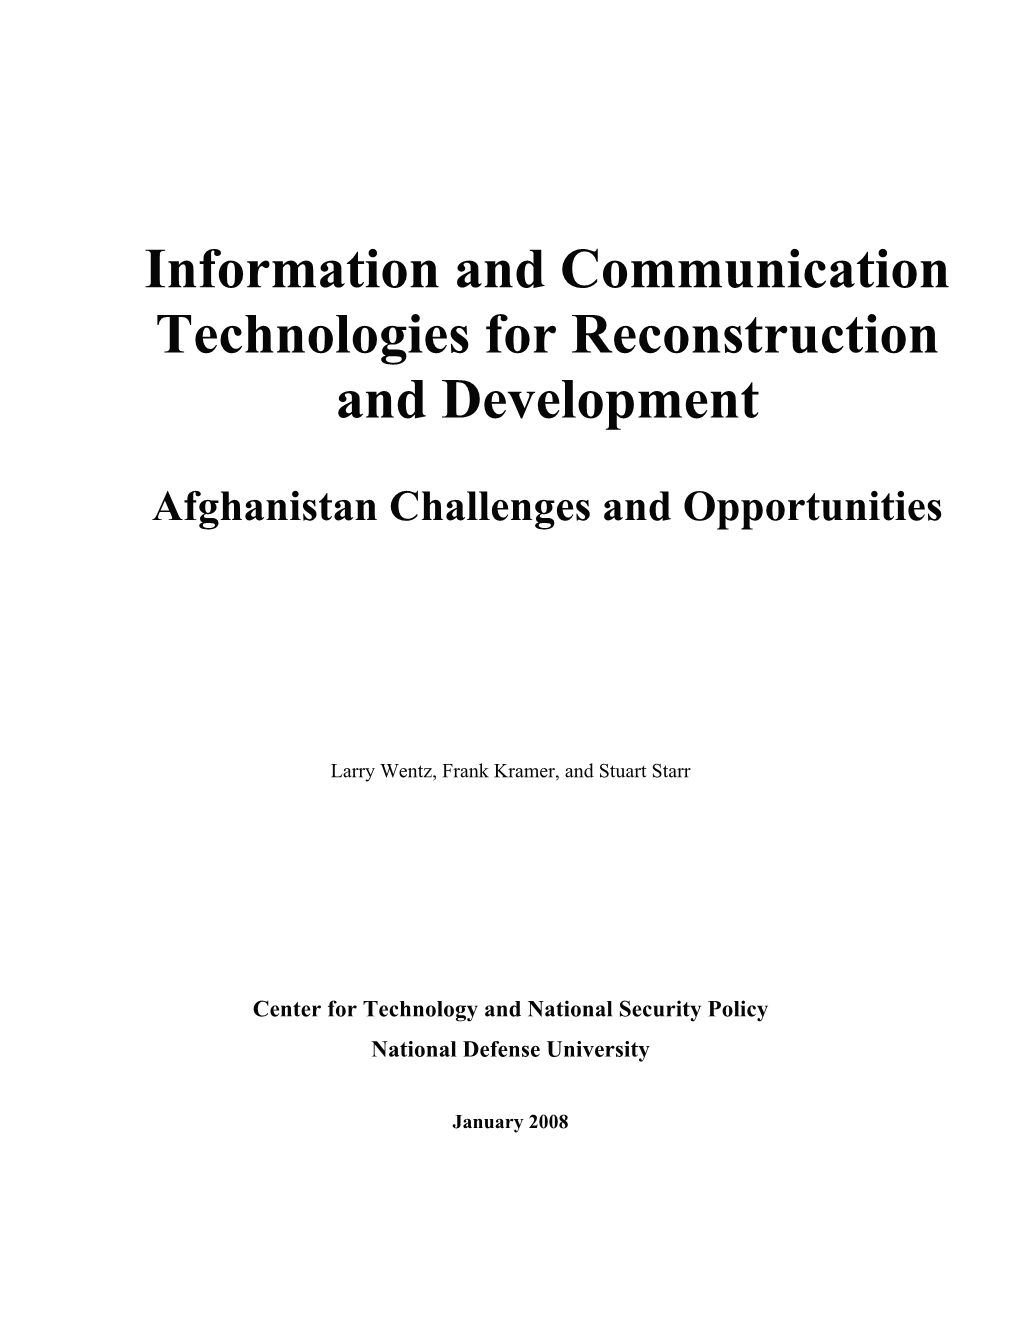 Information and Communication Technologies for Reconstruction